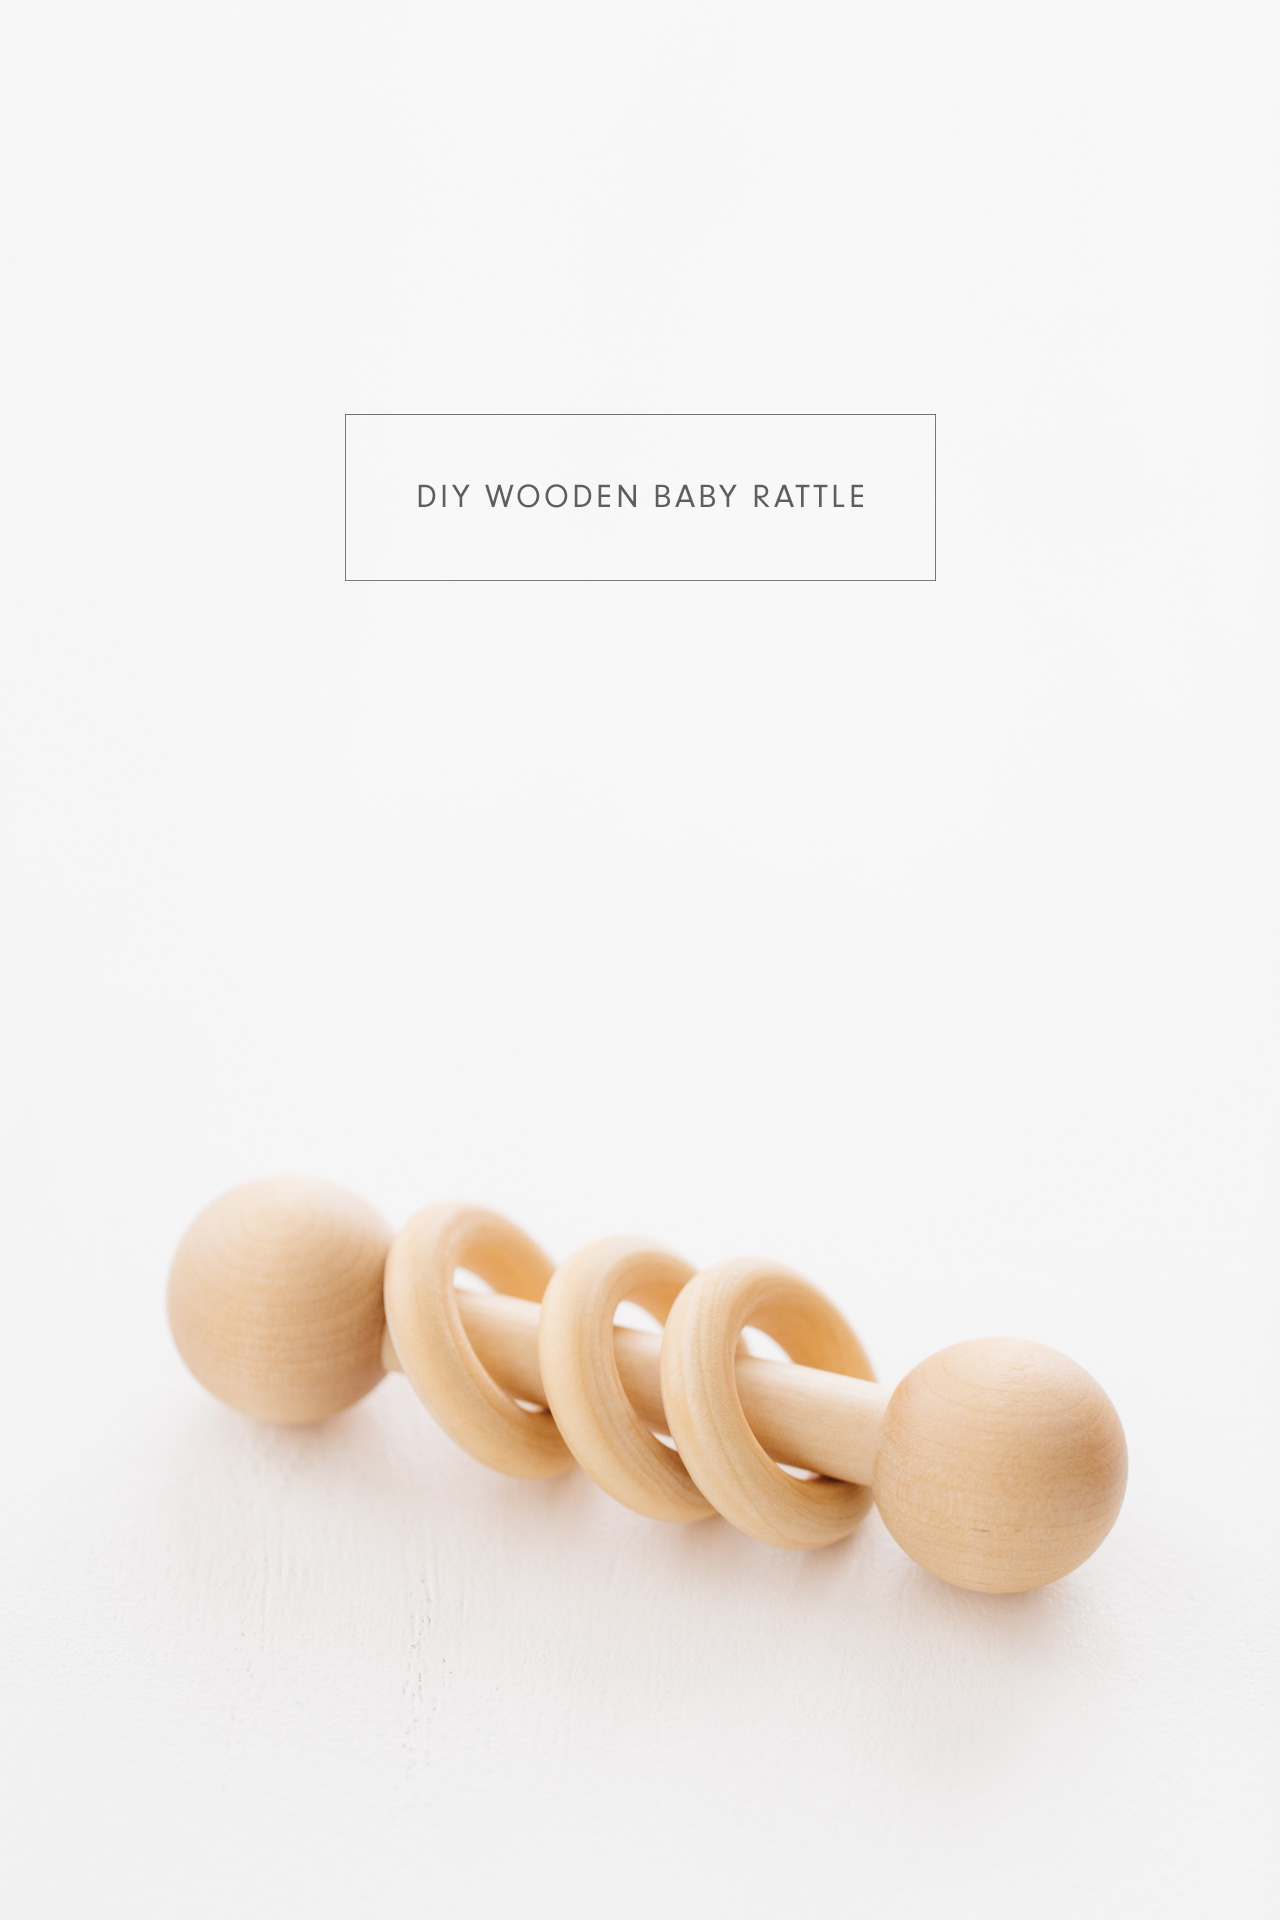 How to Make a Wooden Baby Rattle Toy